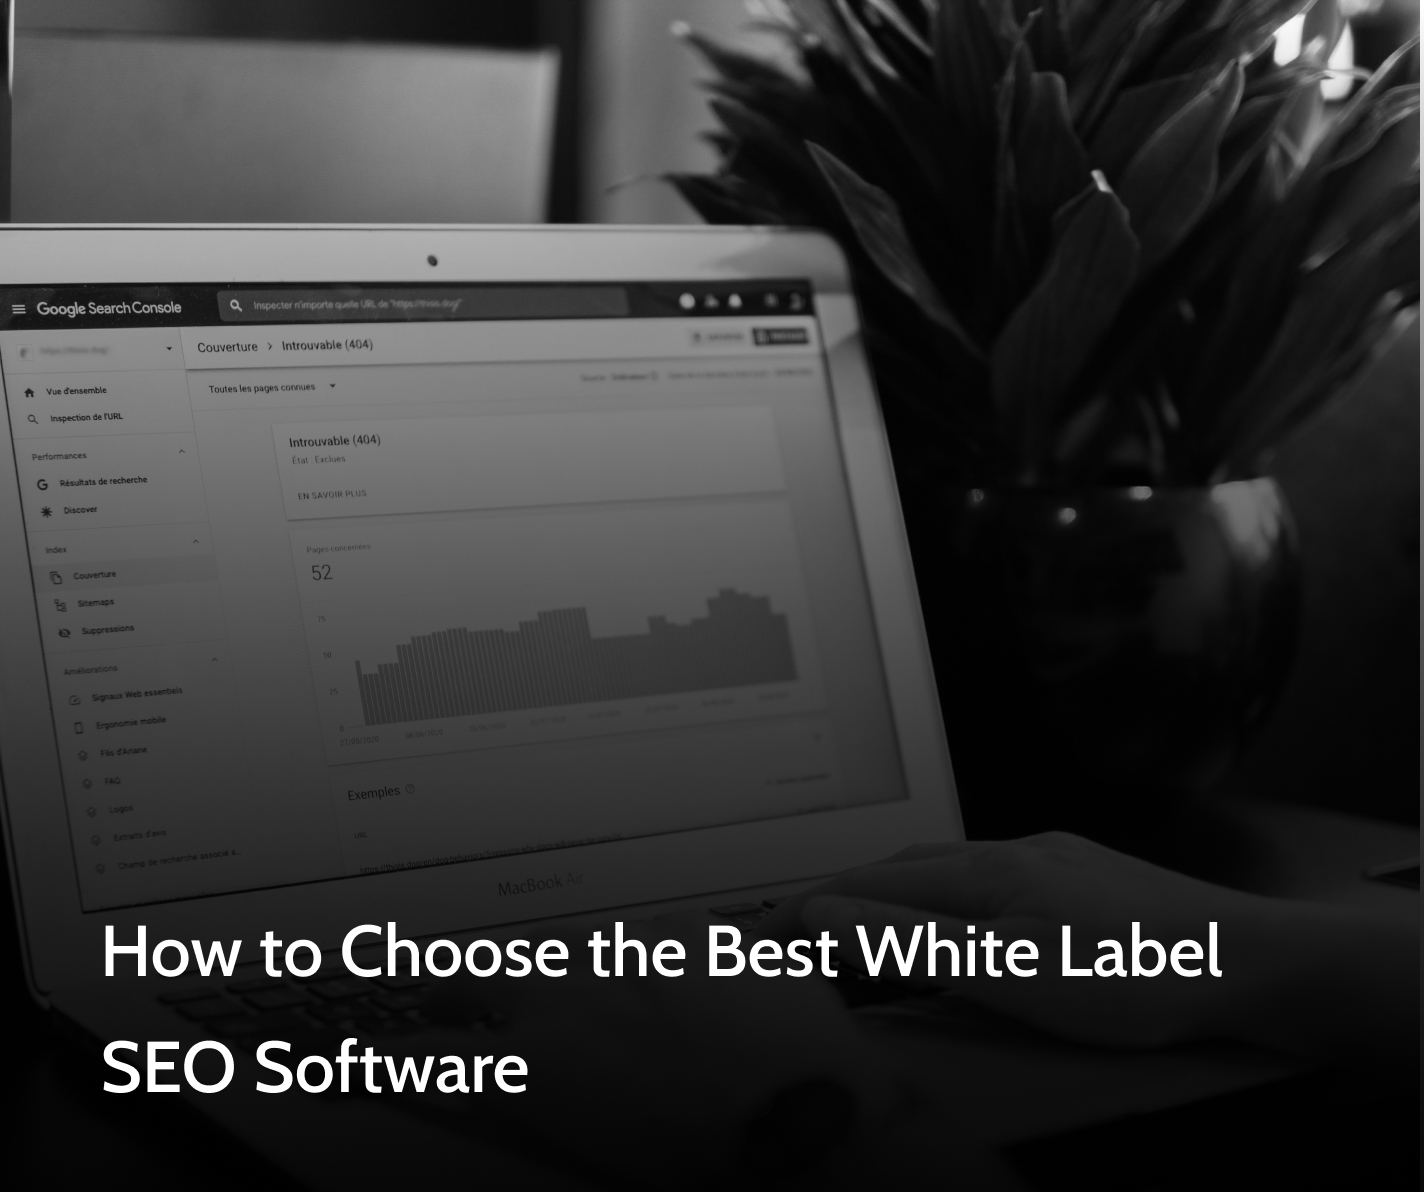 How to Choose the Best White Label SEO Software